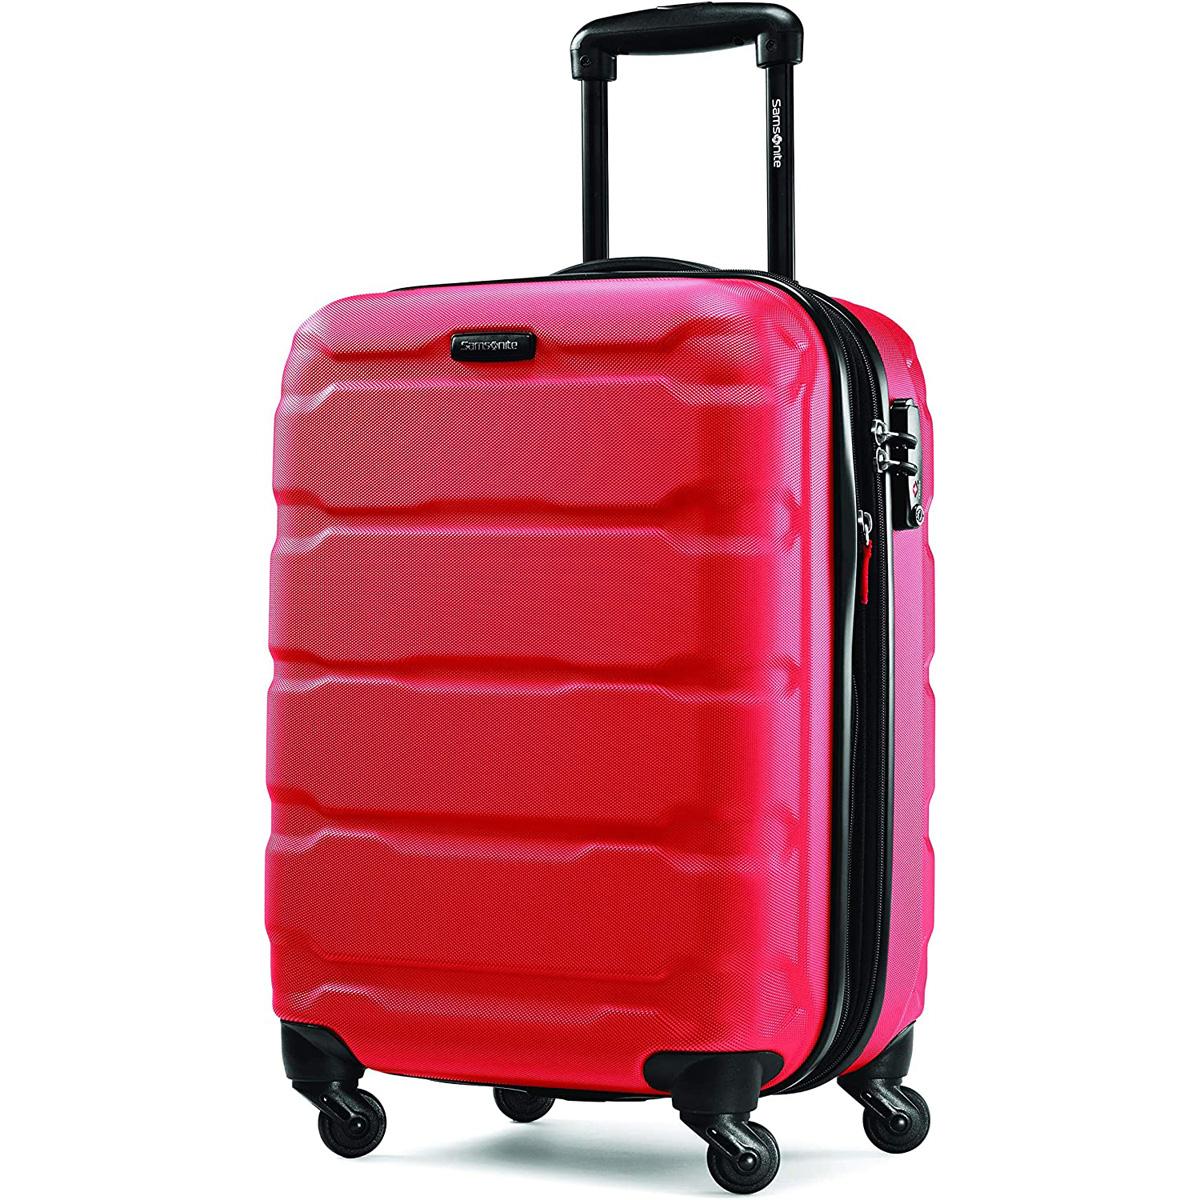 Samsonite Omni PC Hardside Expandable Luggage with Spinner Wheels for $88.89 Shipped